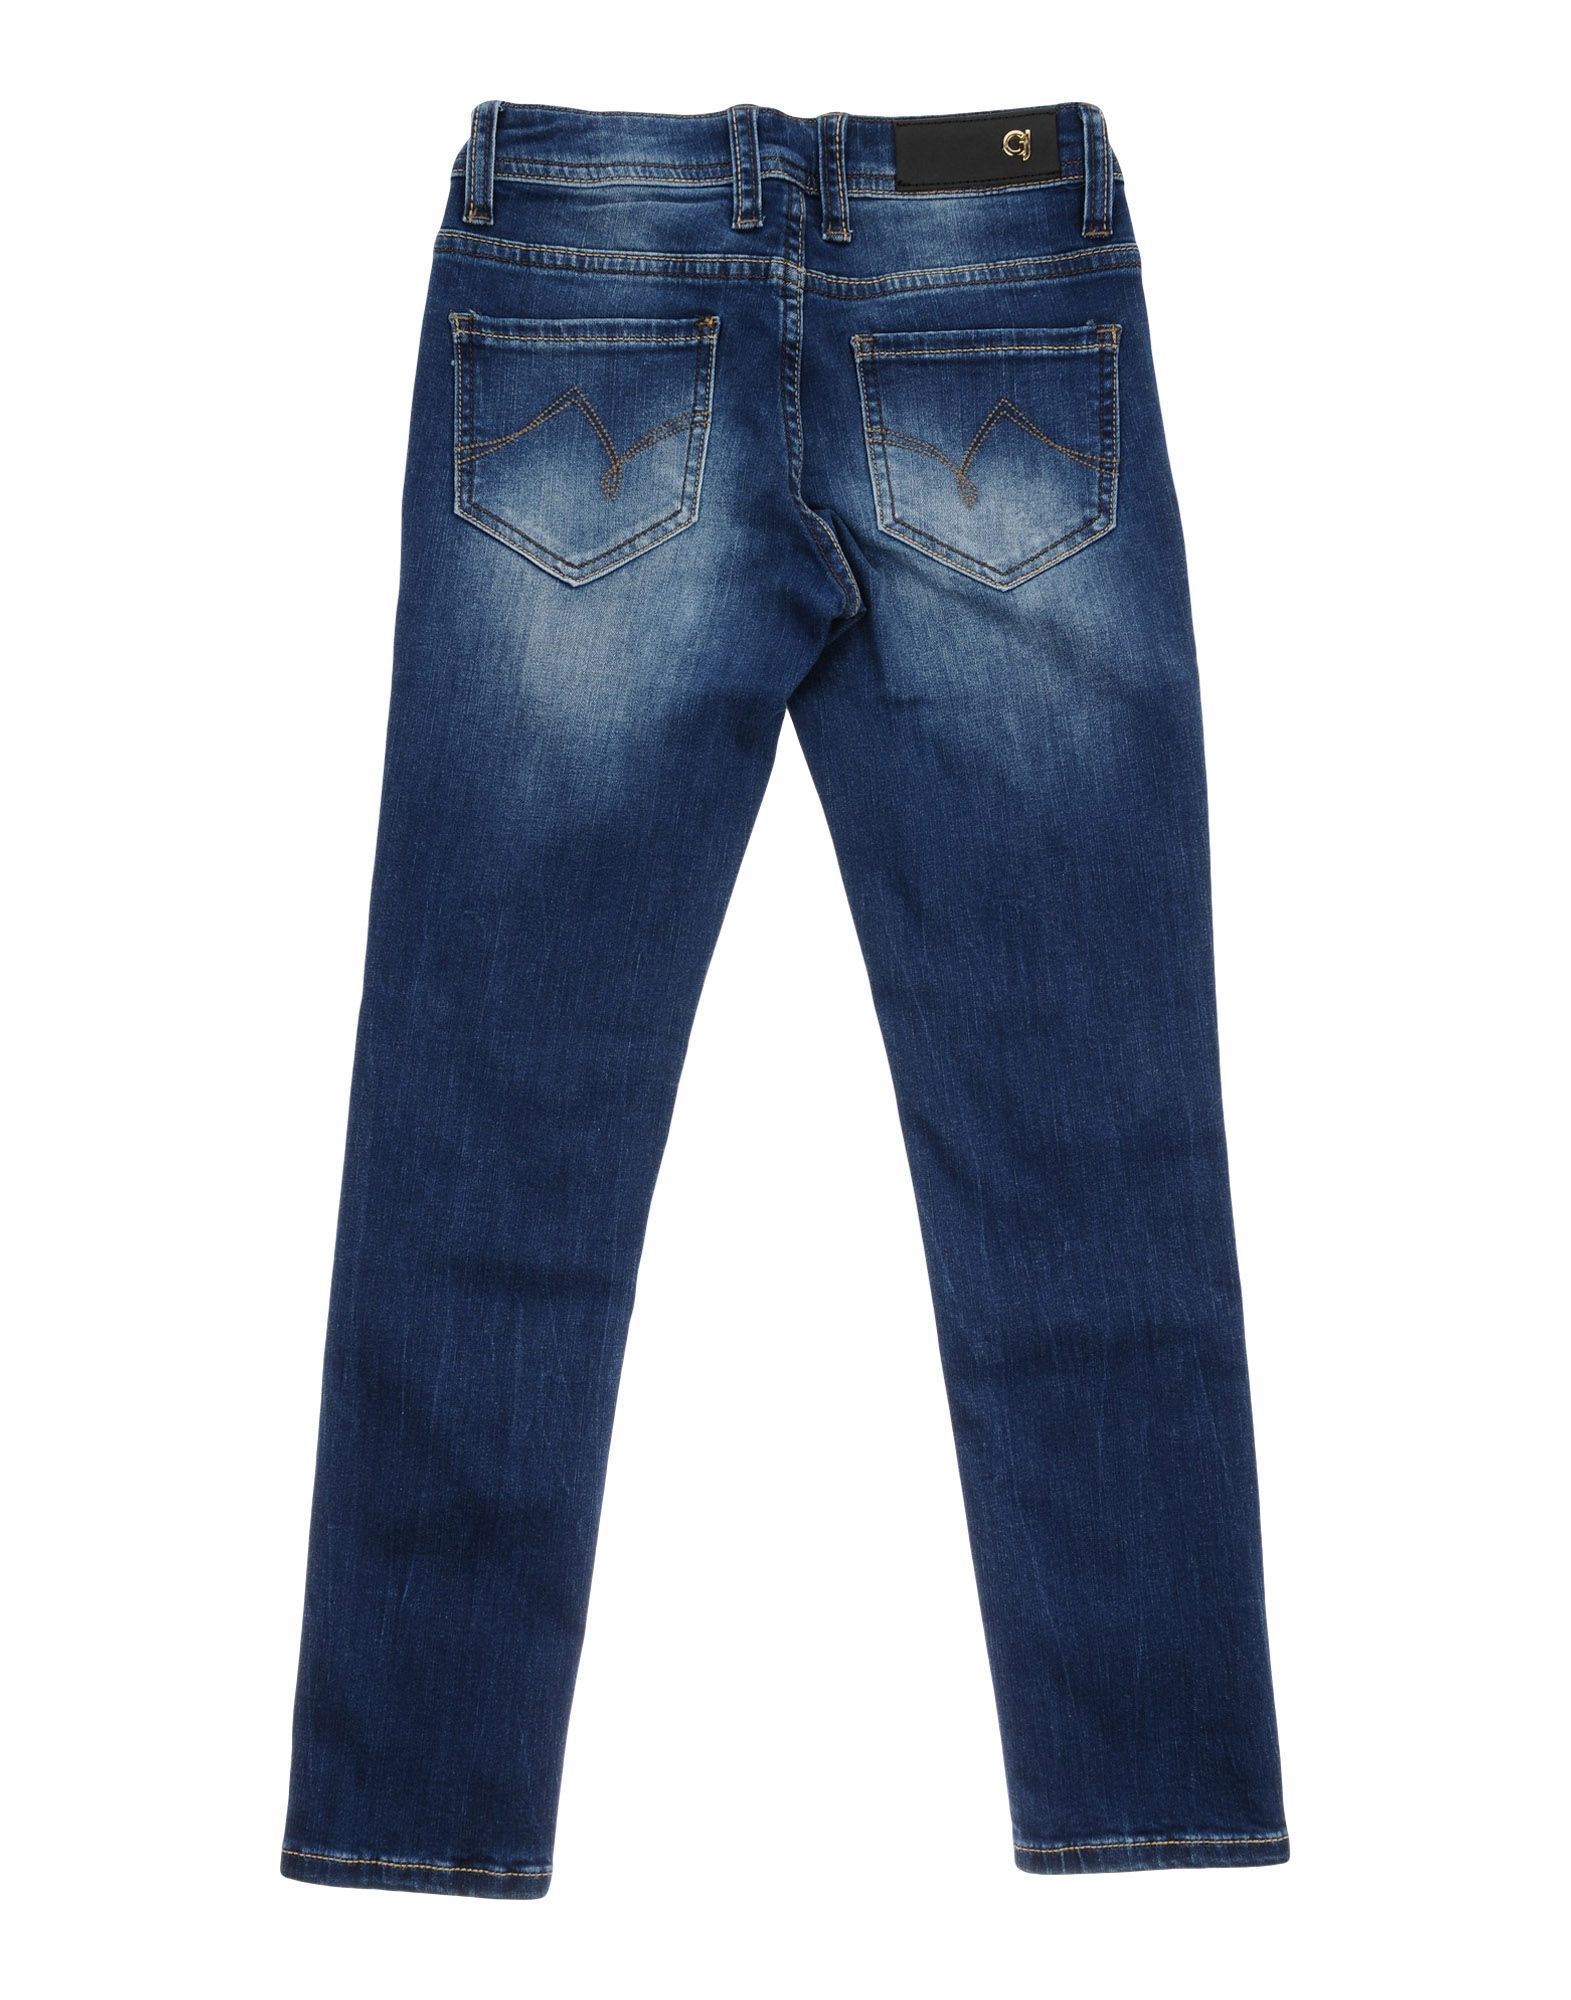 denim, worn effect, faded, leather applications, logo, solid colour, dark wash, mid rise, front closure, button, zip, multipockets, wash at 30� c, do not dry clean, iron at 110� c max, do not bleach, tumble dryable, straight-leg pants, small sized